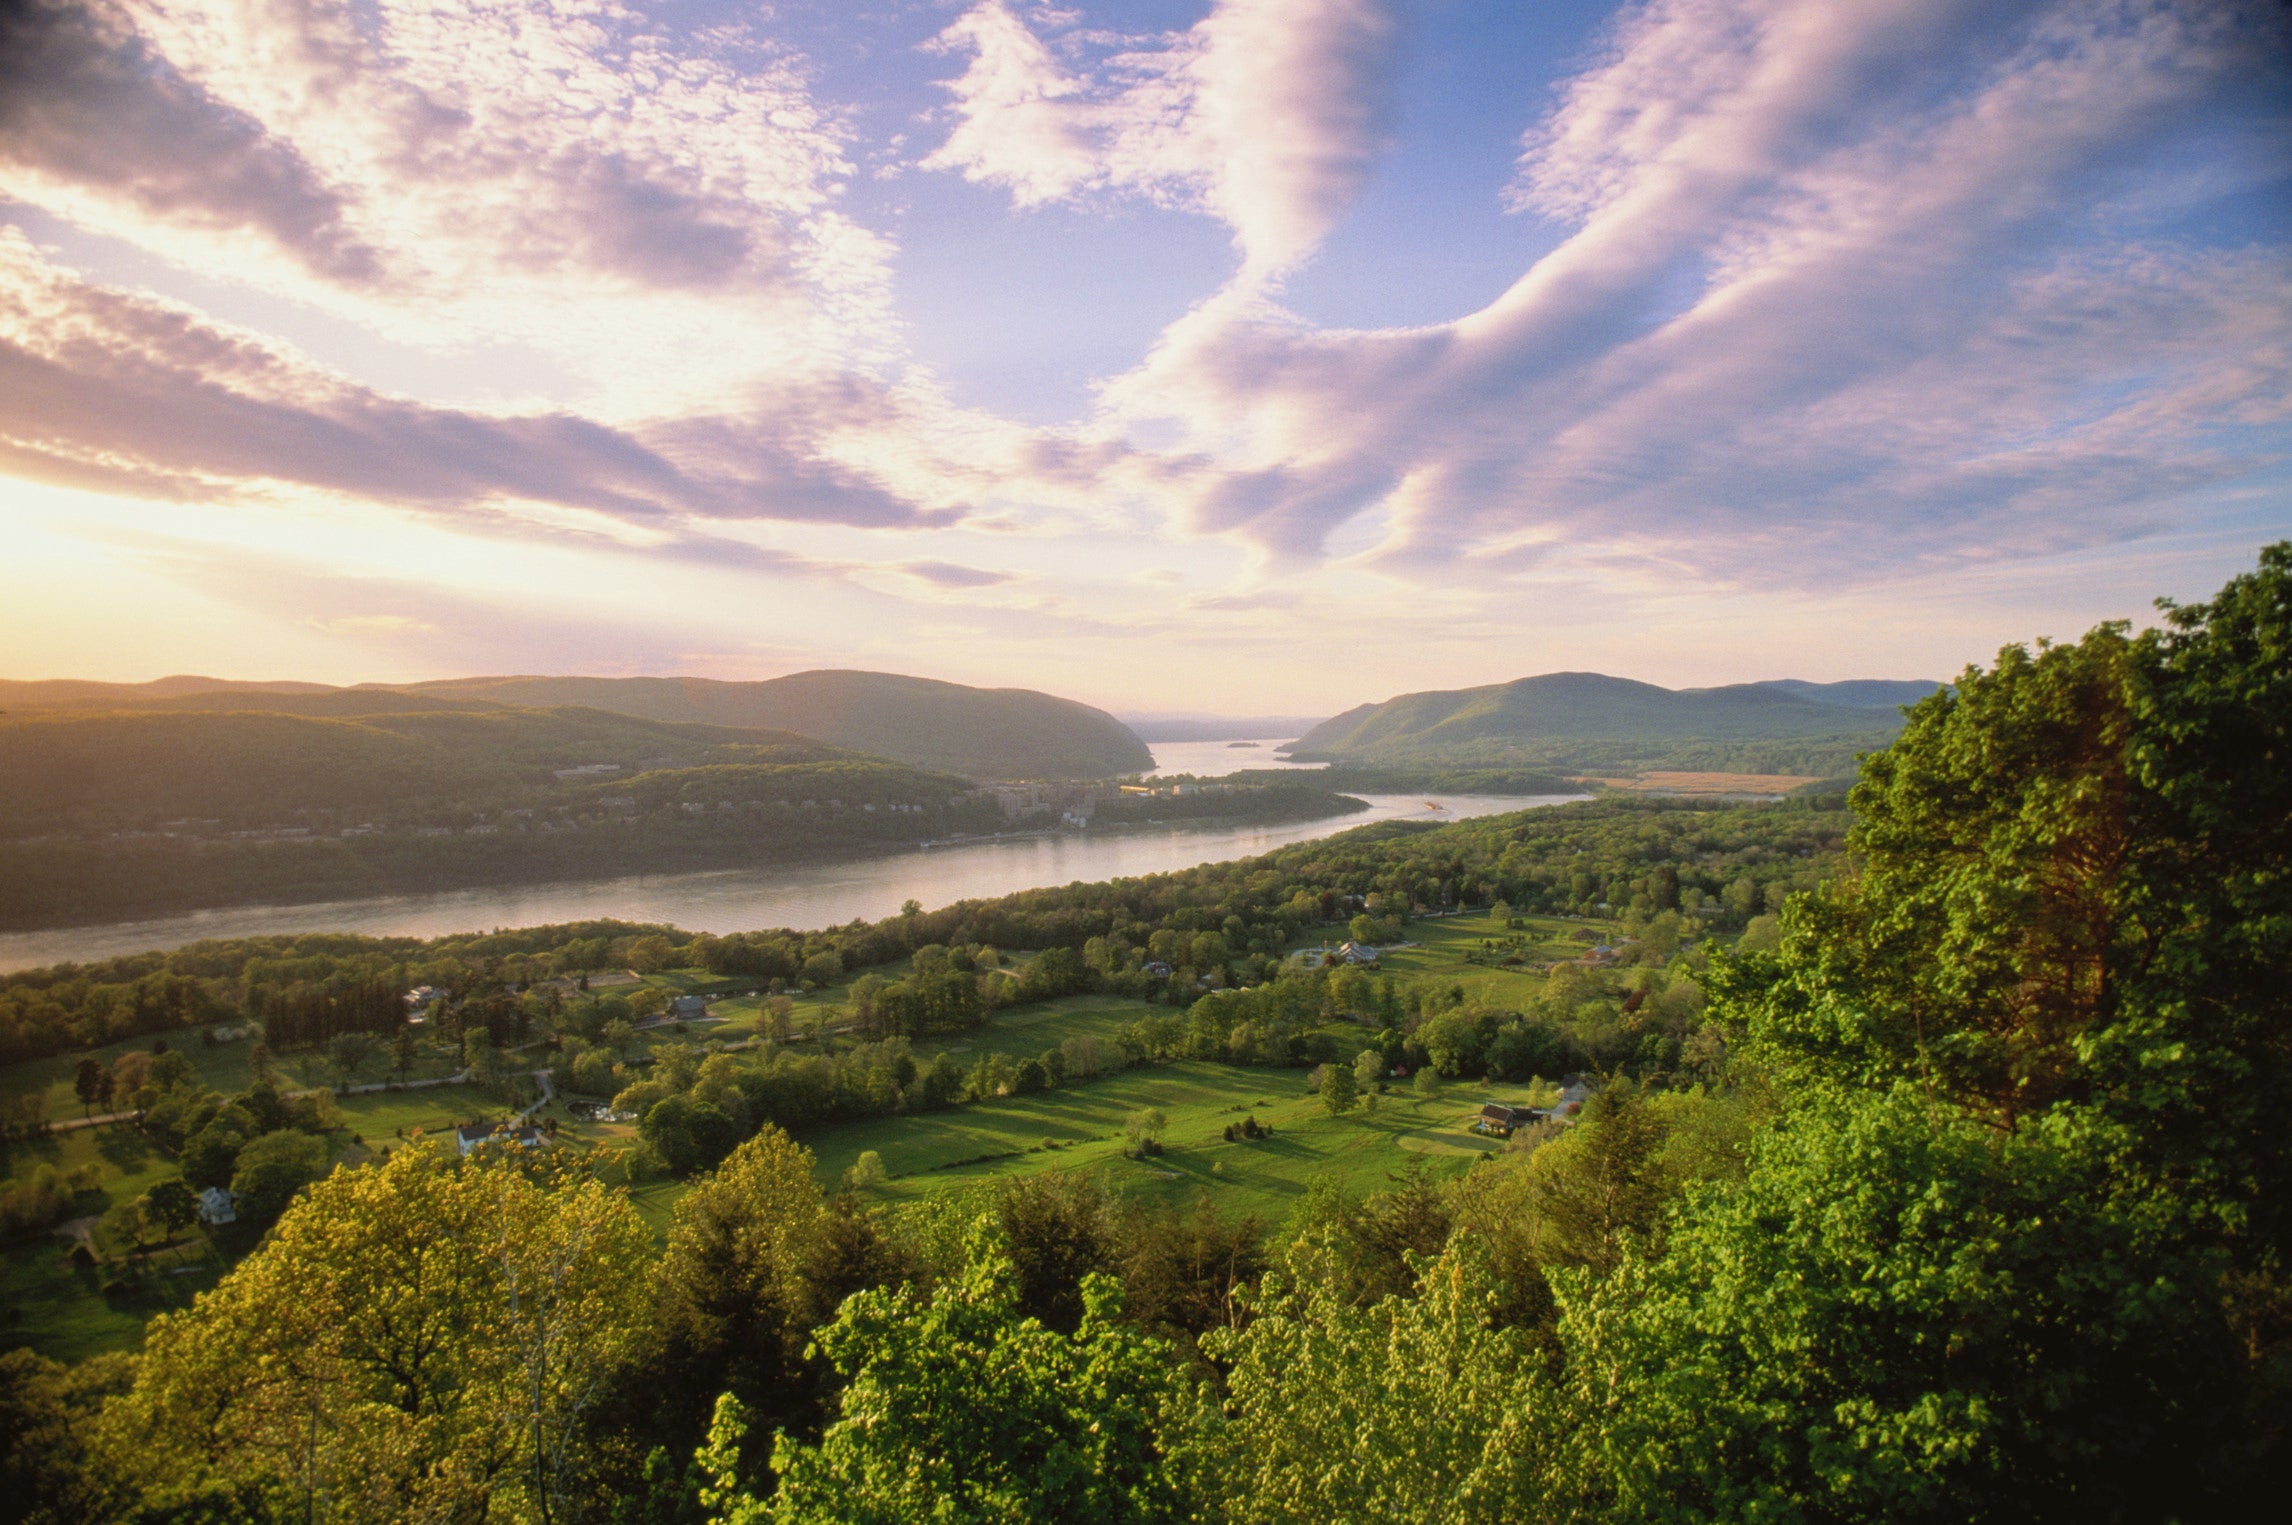 Get Lost: 72 Hours In New York's Hudson Valley